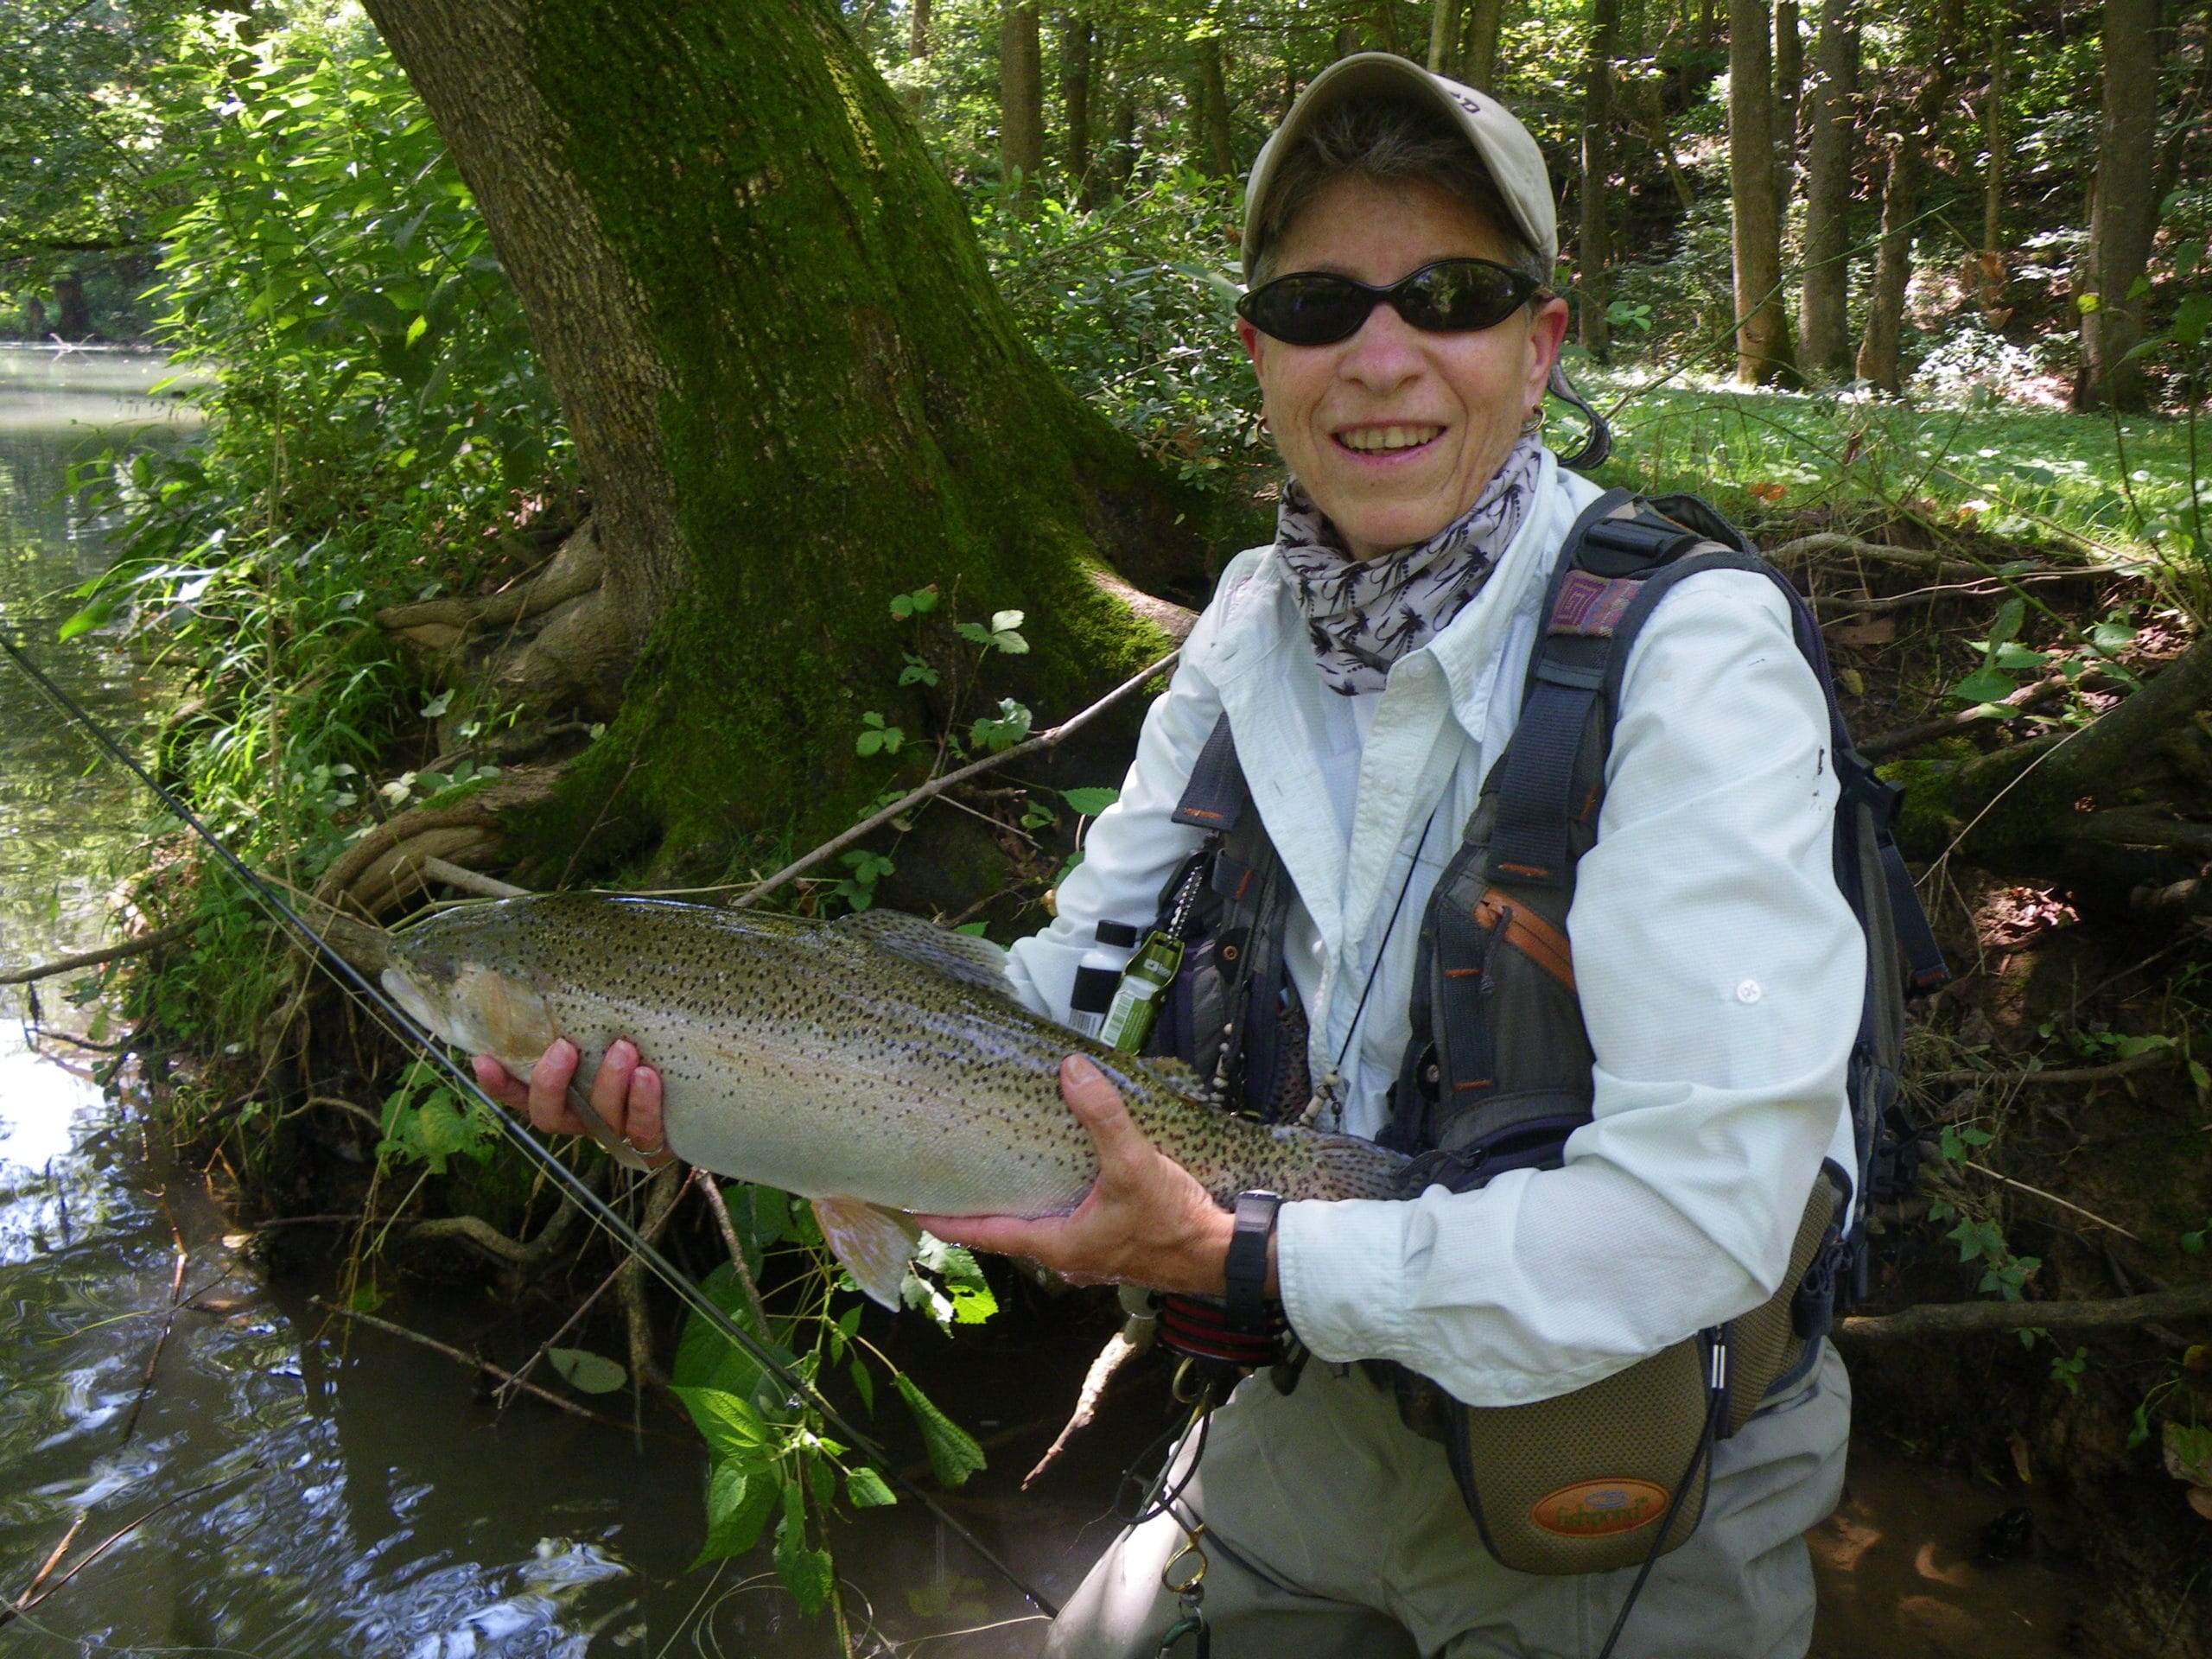 Kiki Galvin fishes all over the country and has been a professional guide for many years